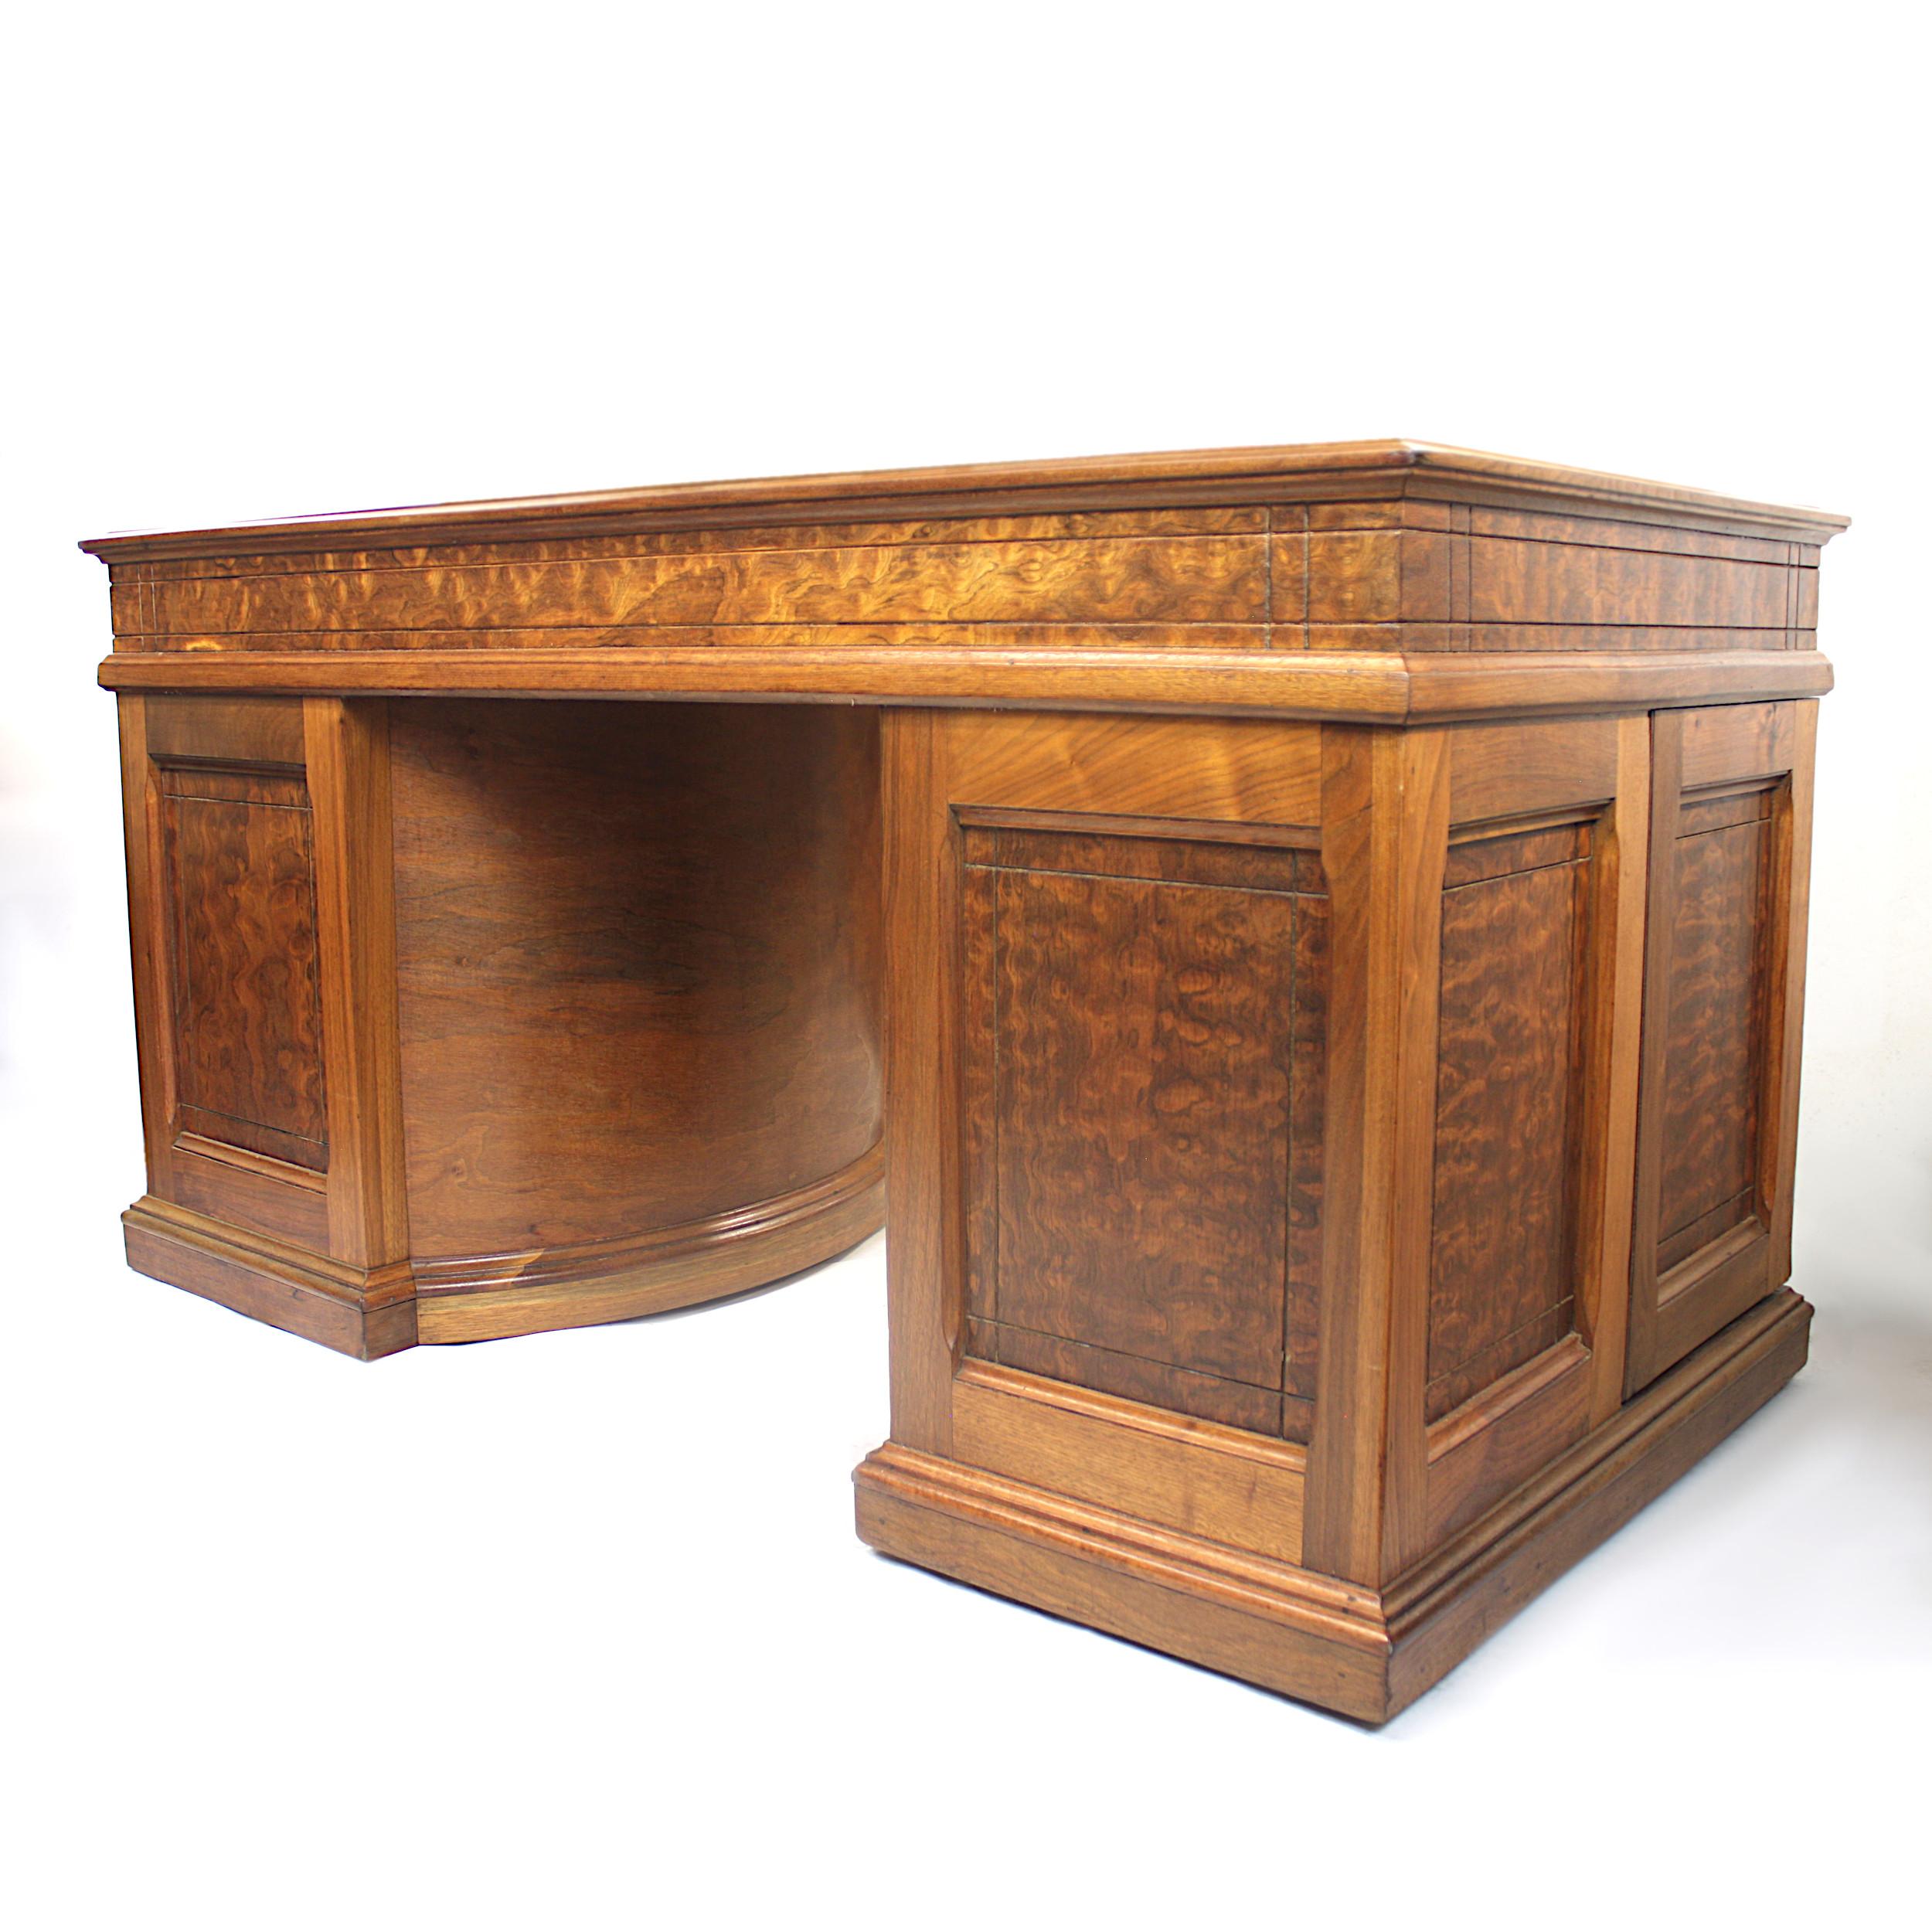 American Rare 1888 Queen Anne No. 8 Walnut Rotary Desk by the Wooton Desk Mfg. Co.